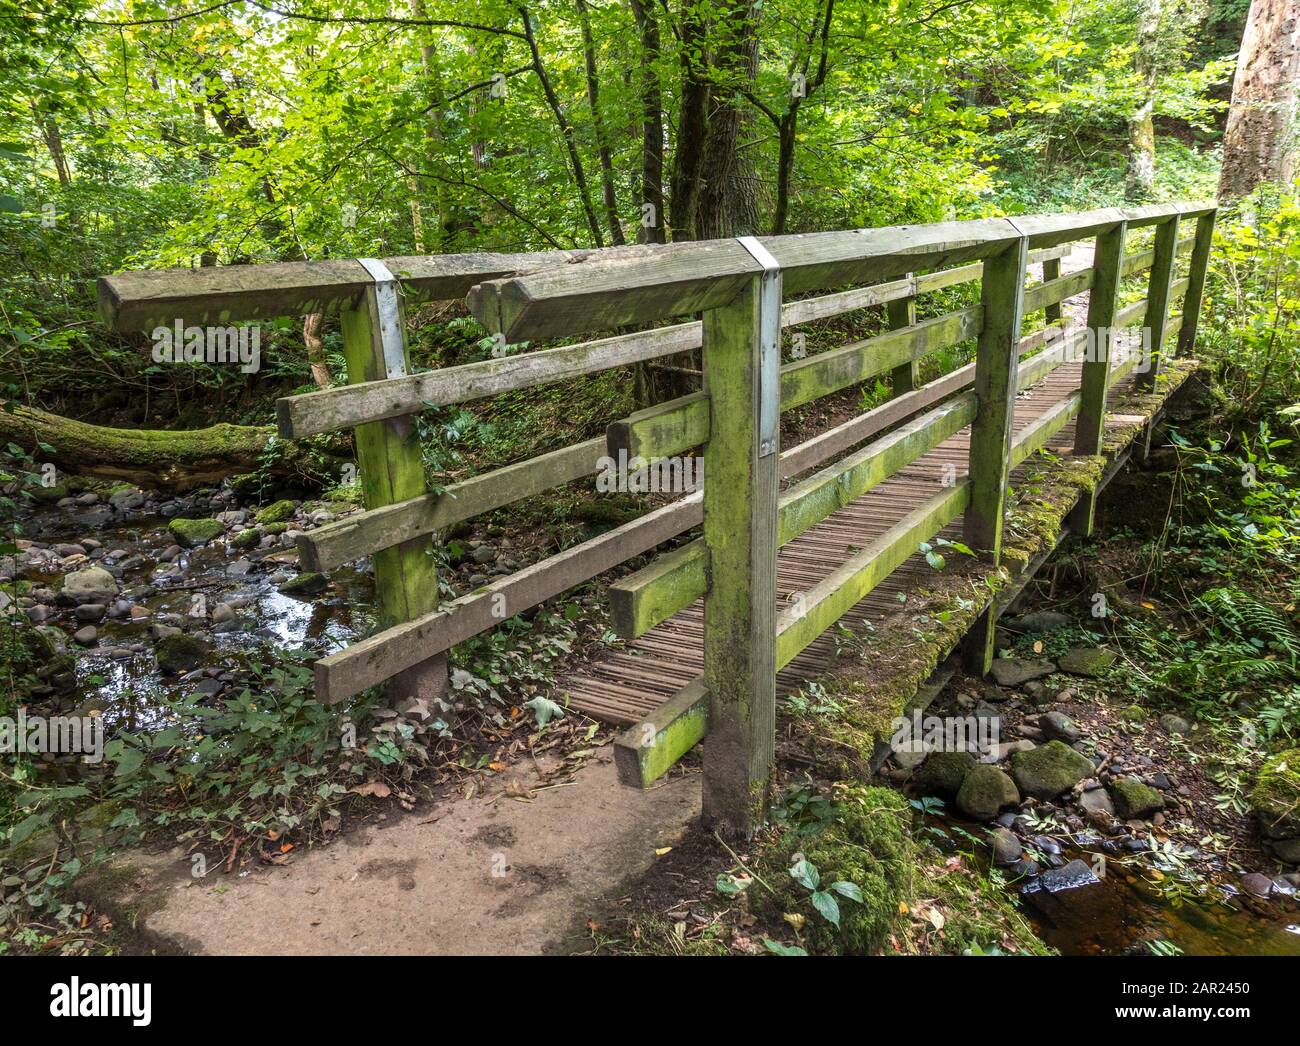 Small wooden bridge for people to cross over a stream in Deepdale Wood nature reserve, Barnard Castle, Teesdale, County Durham, England, UK. Stock Photo